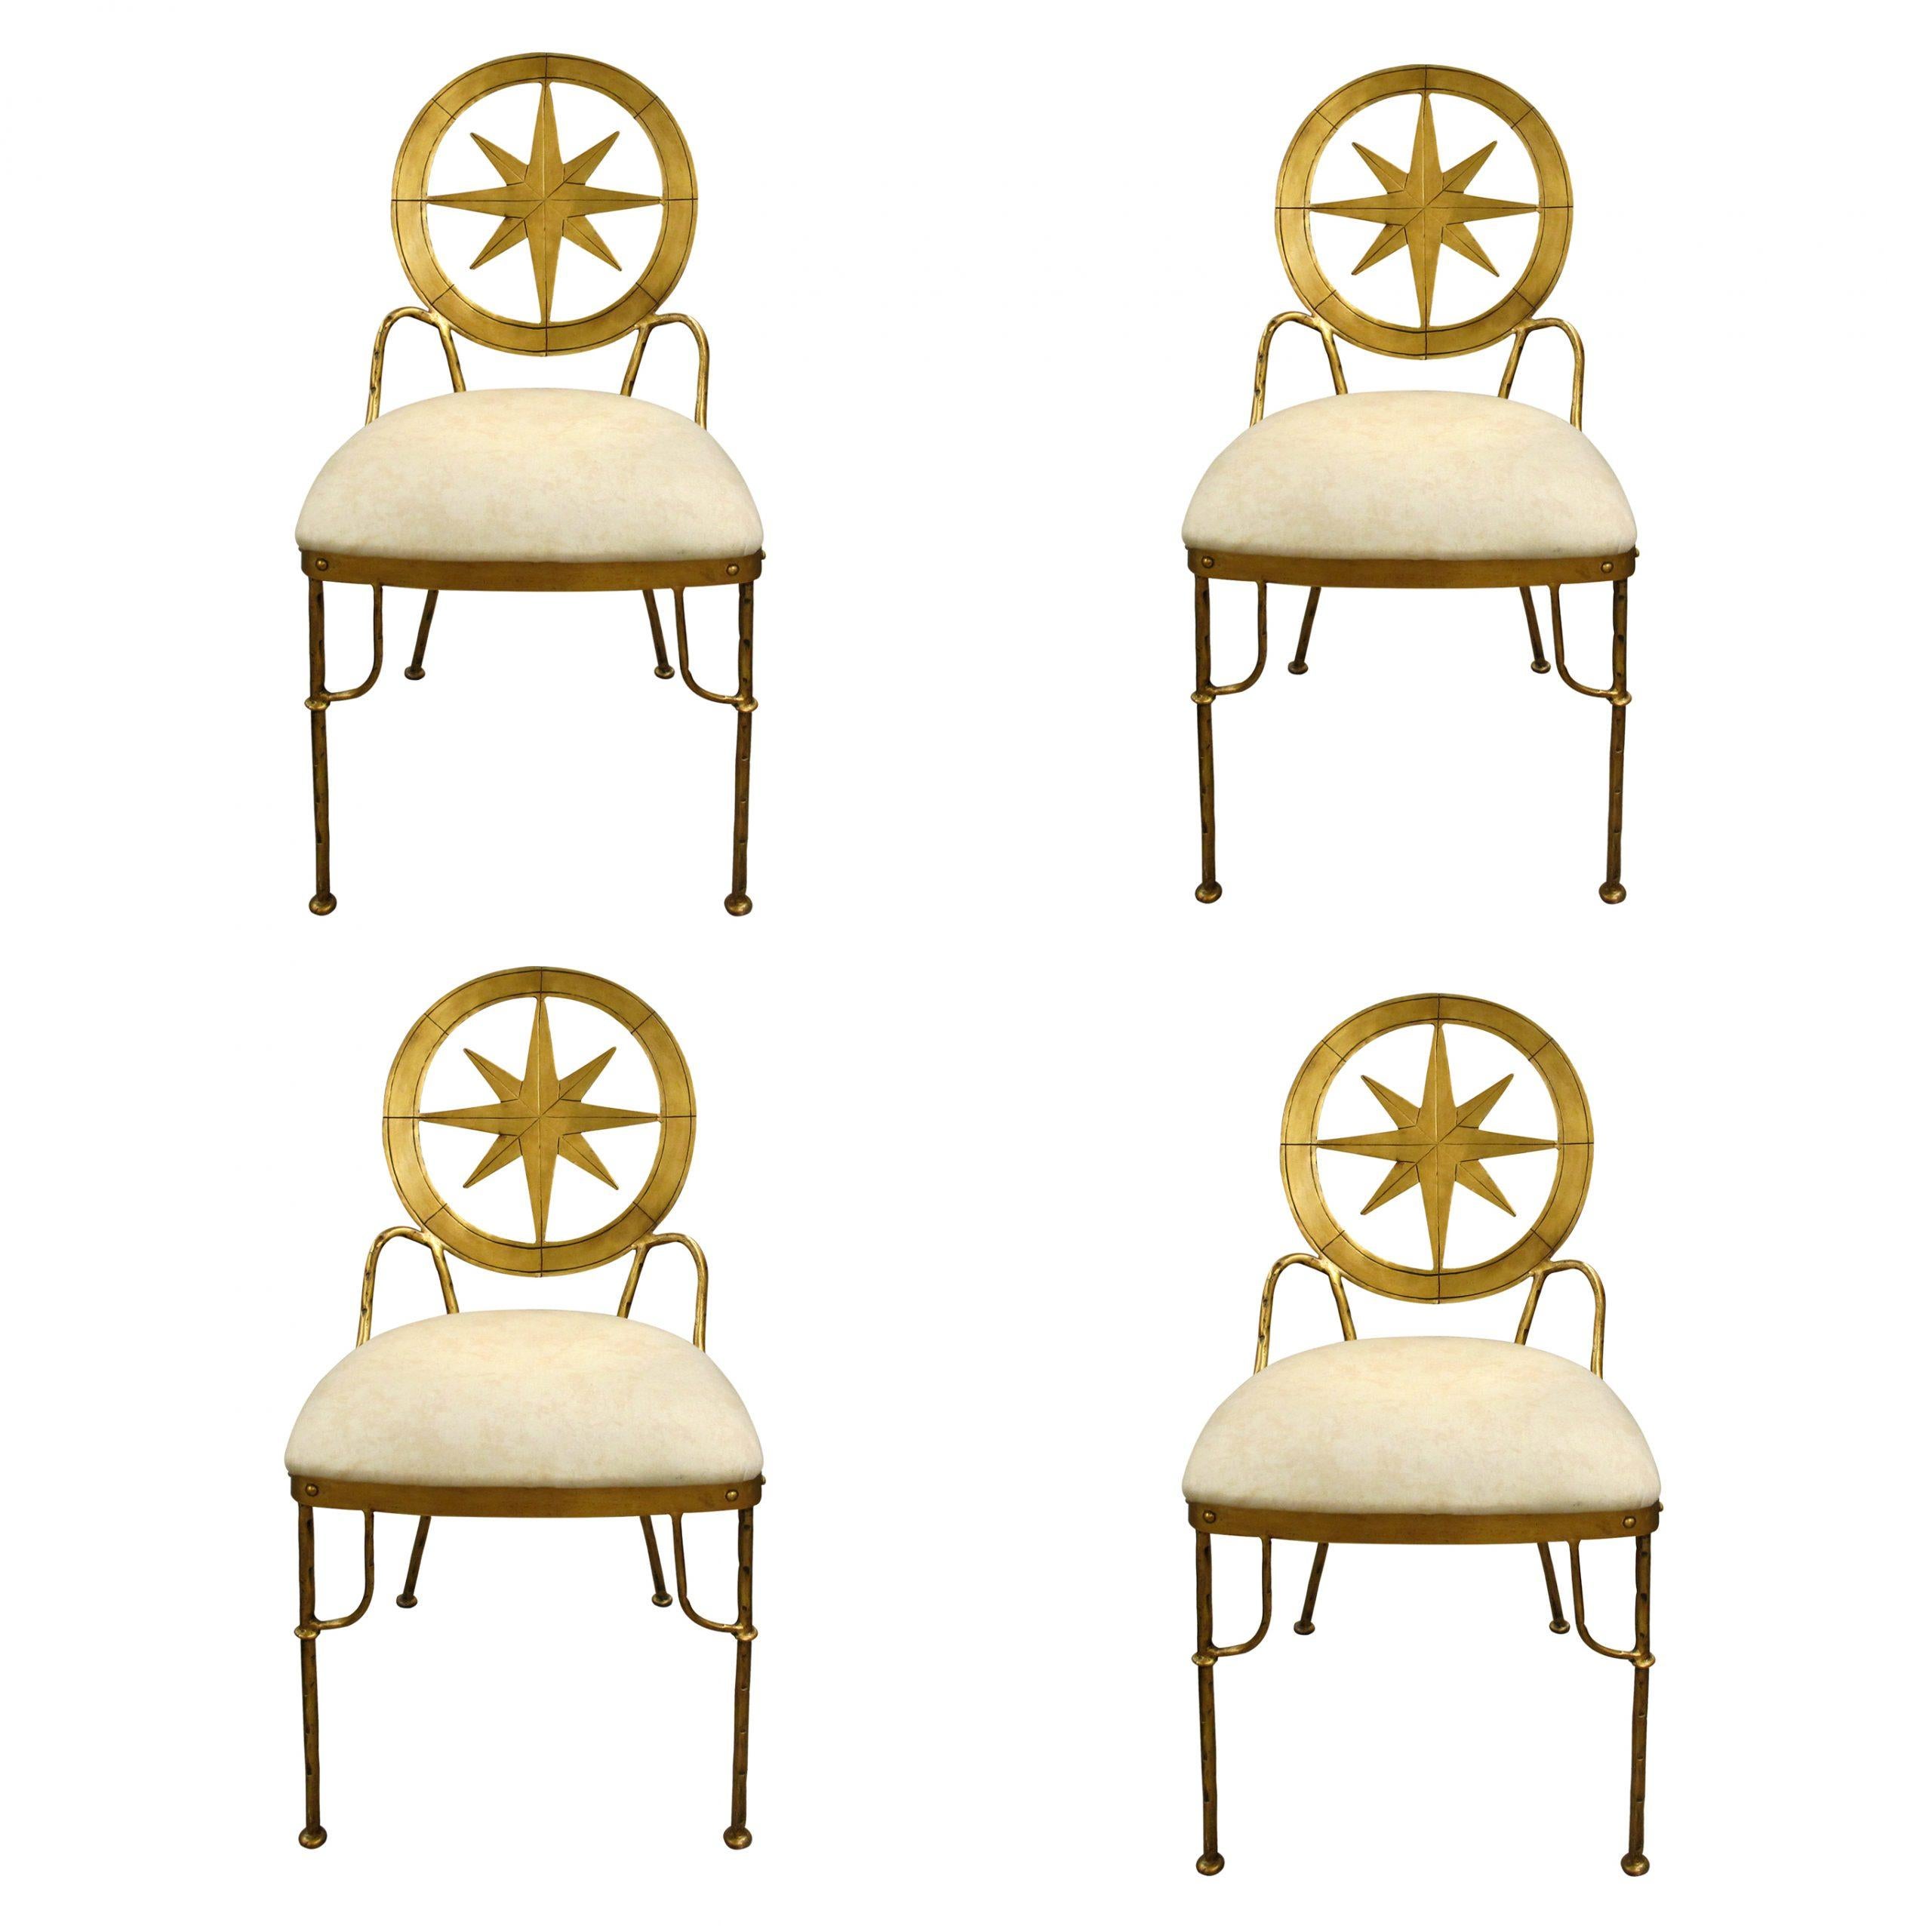 This is a very unusual and highly decorative set of four dining chairs. The chairs backrests are oval and curved; the very well designed stars give a comfortable back support. The seats are very well padded and upholstered in a light patterned